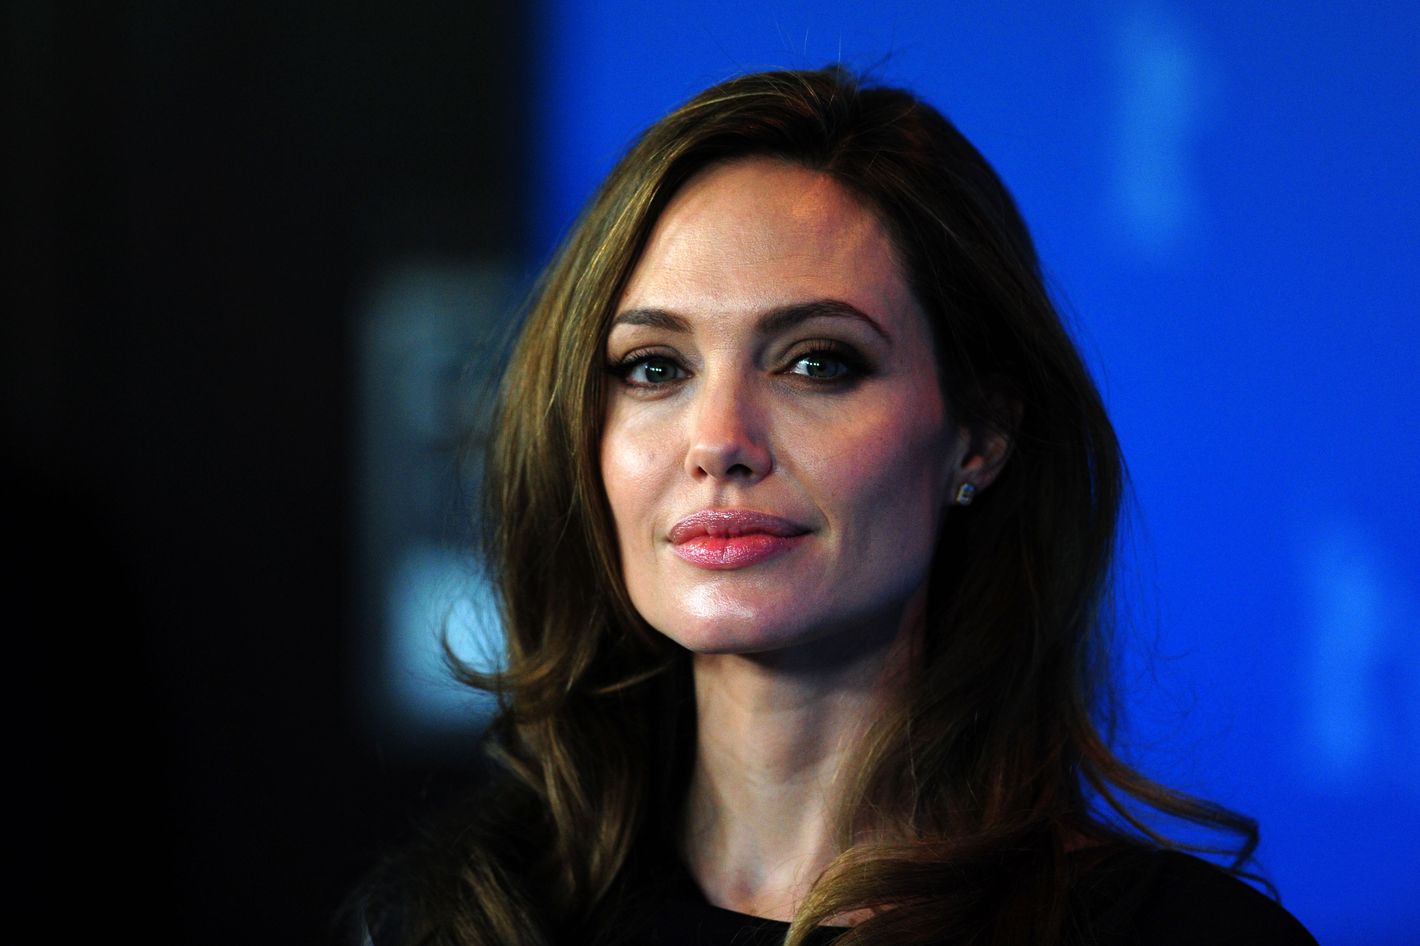 Angelina Jolie's breast cancer op-ed may have cost the health